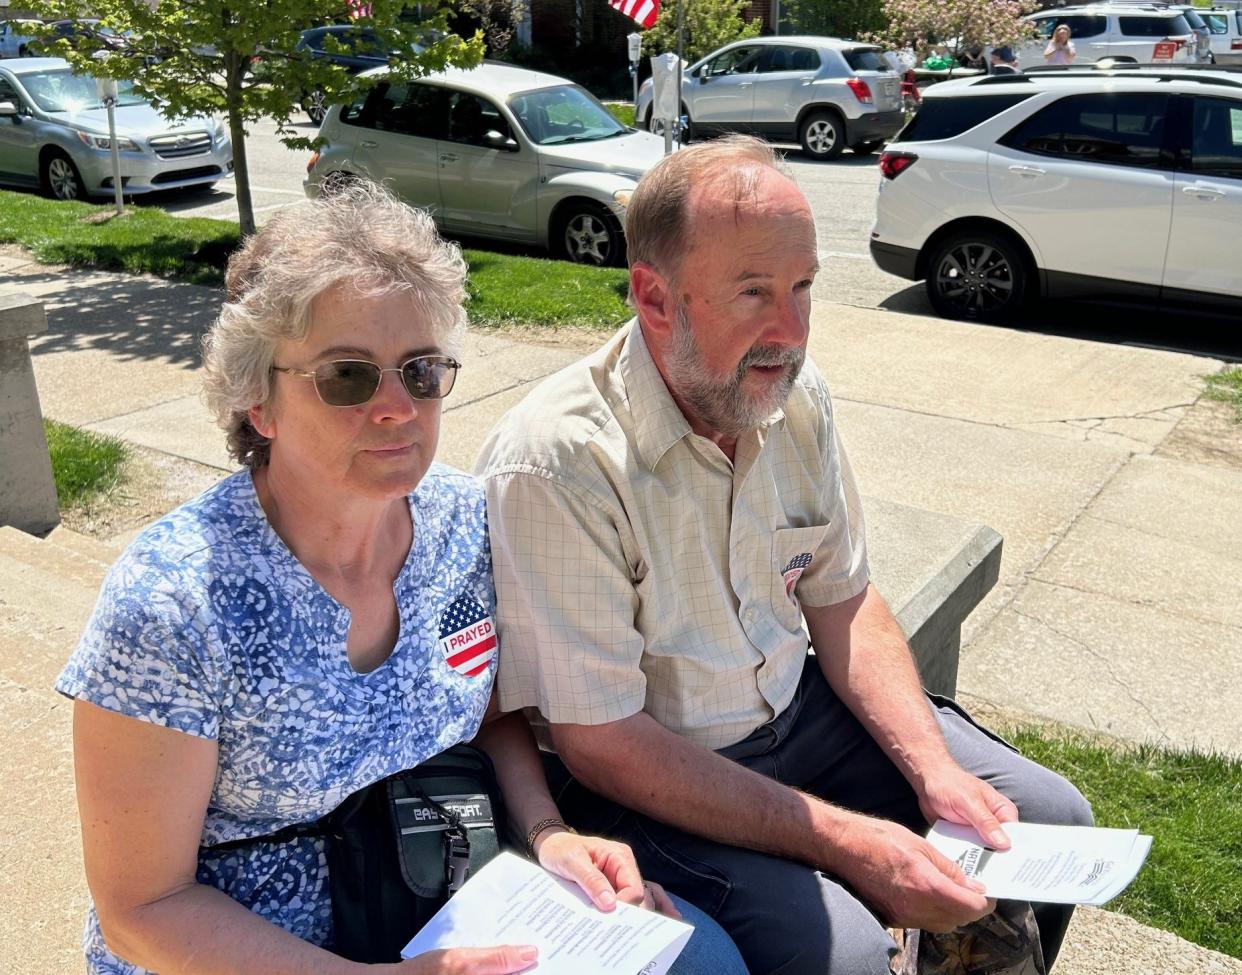 Nita and David Johnson, of Garrett, are attending the National Day of Prayer observance in Somerset for the third year.